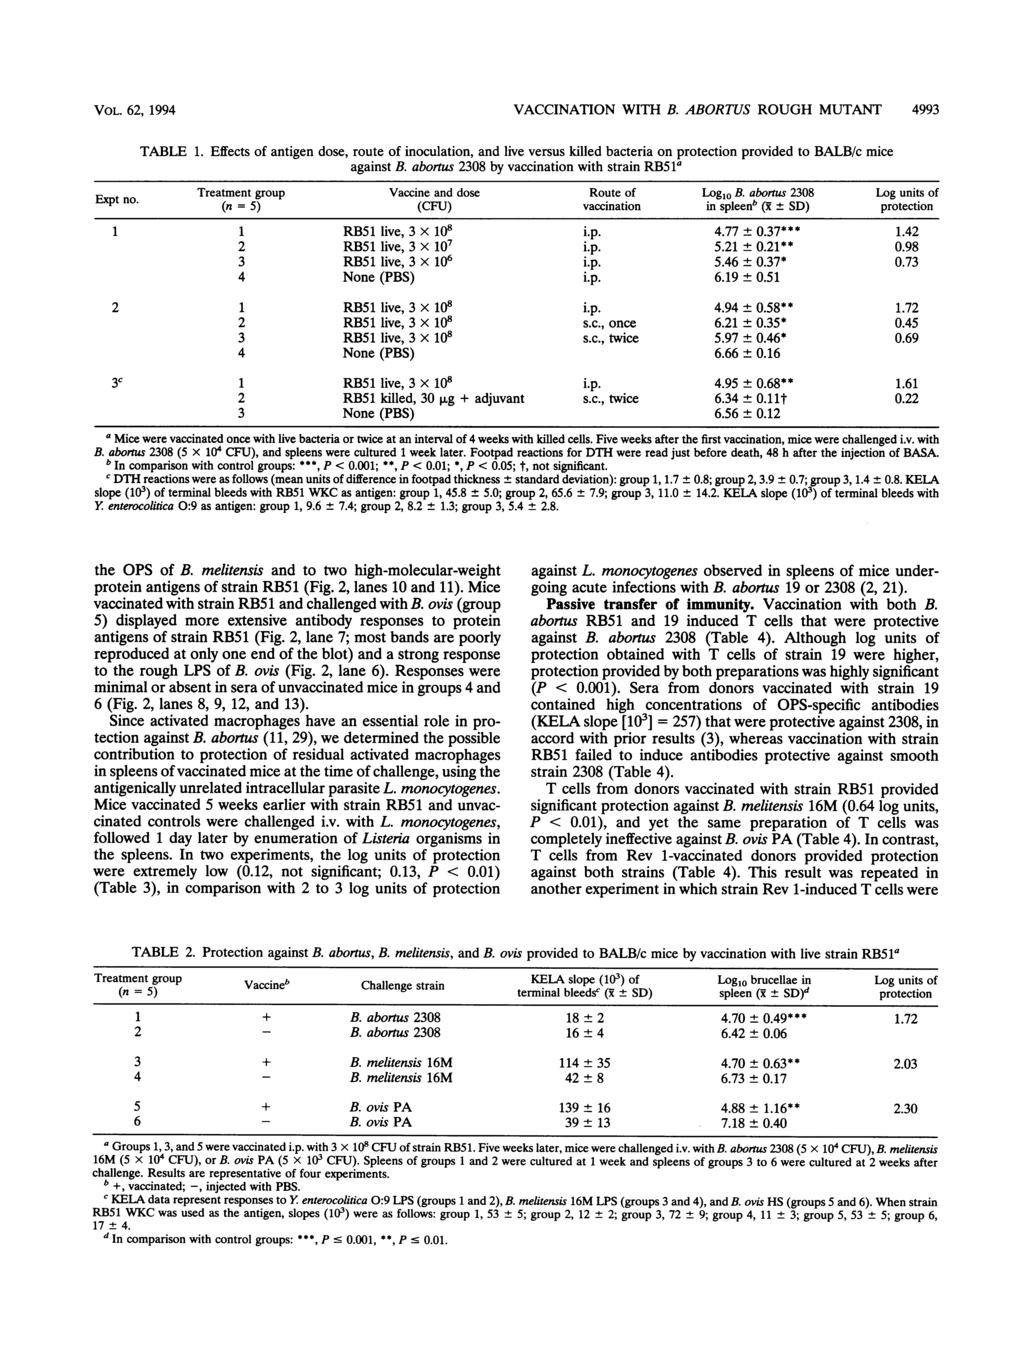 VOL. 62, 1994 VACCINATION WITH B. ABORTUS ROUGH MUTANT 4993 TABLE 1. Effects of antigen dose, route of inoculation, and live versus killed bacteria on protection provided to BALB/c mice against B.